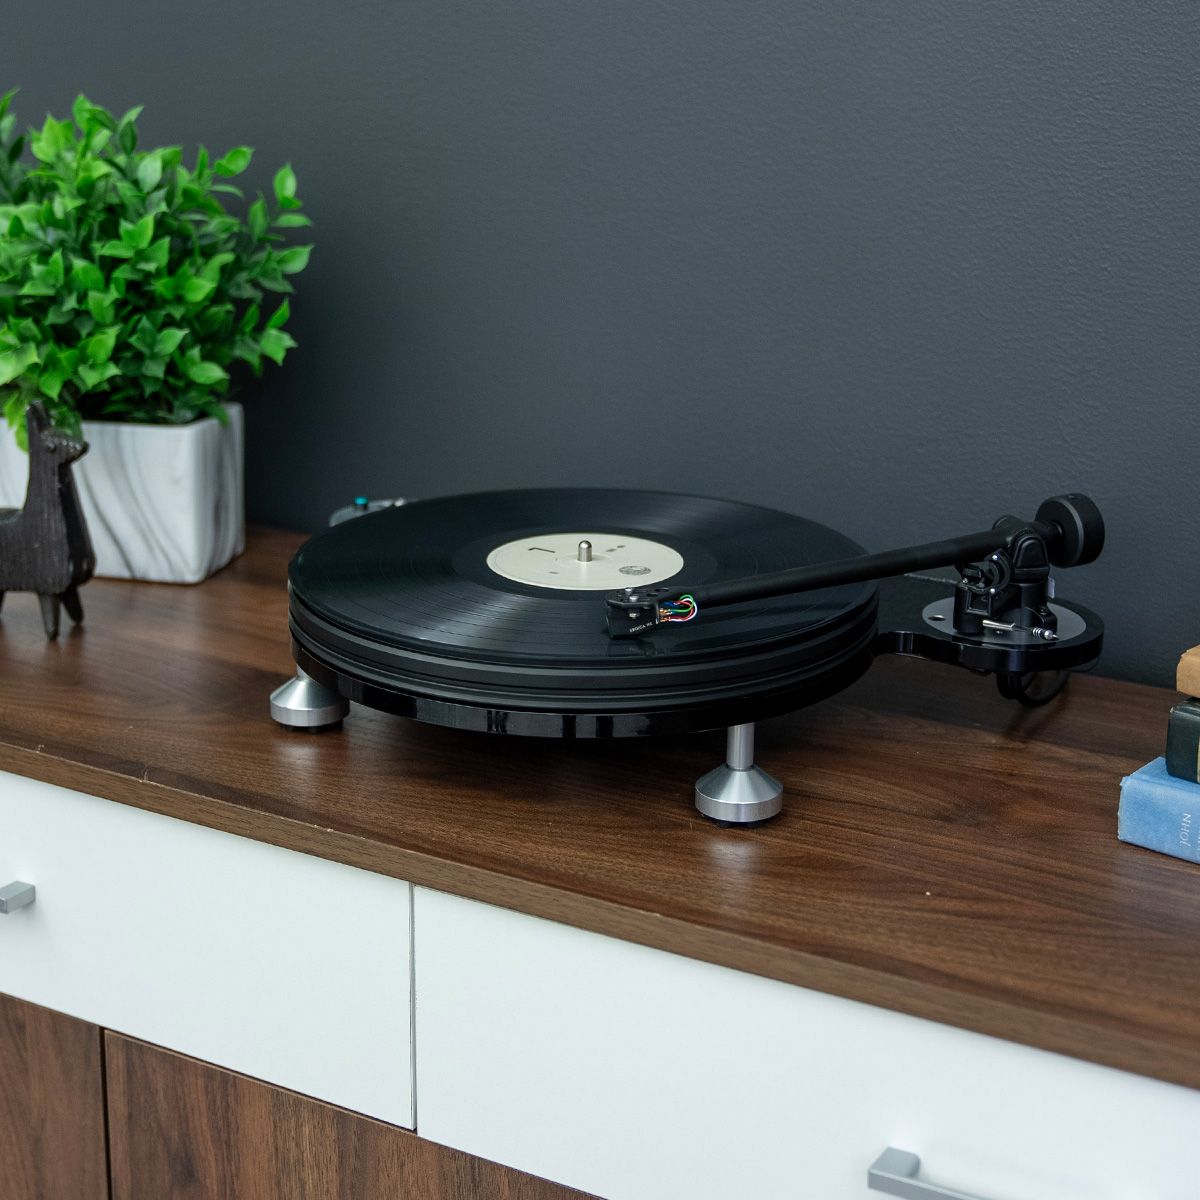 Michell TecnoDec Turntable on a wooden console cabinet